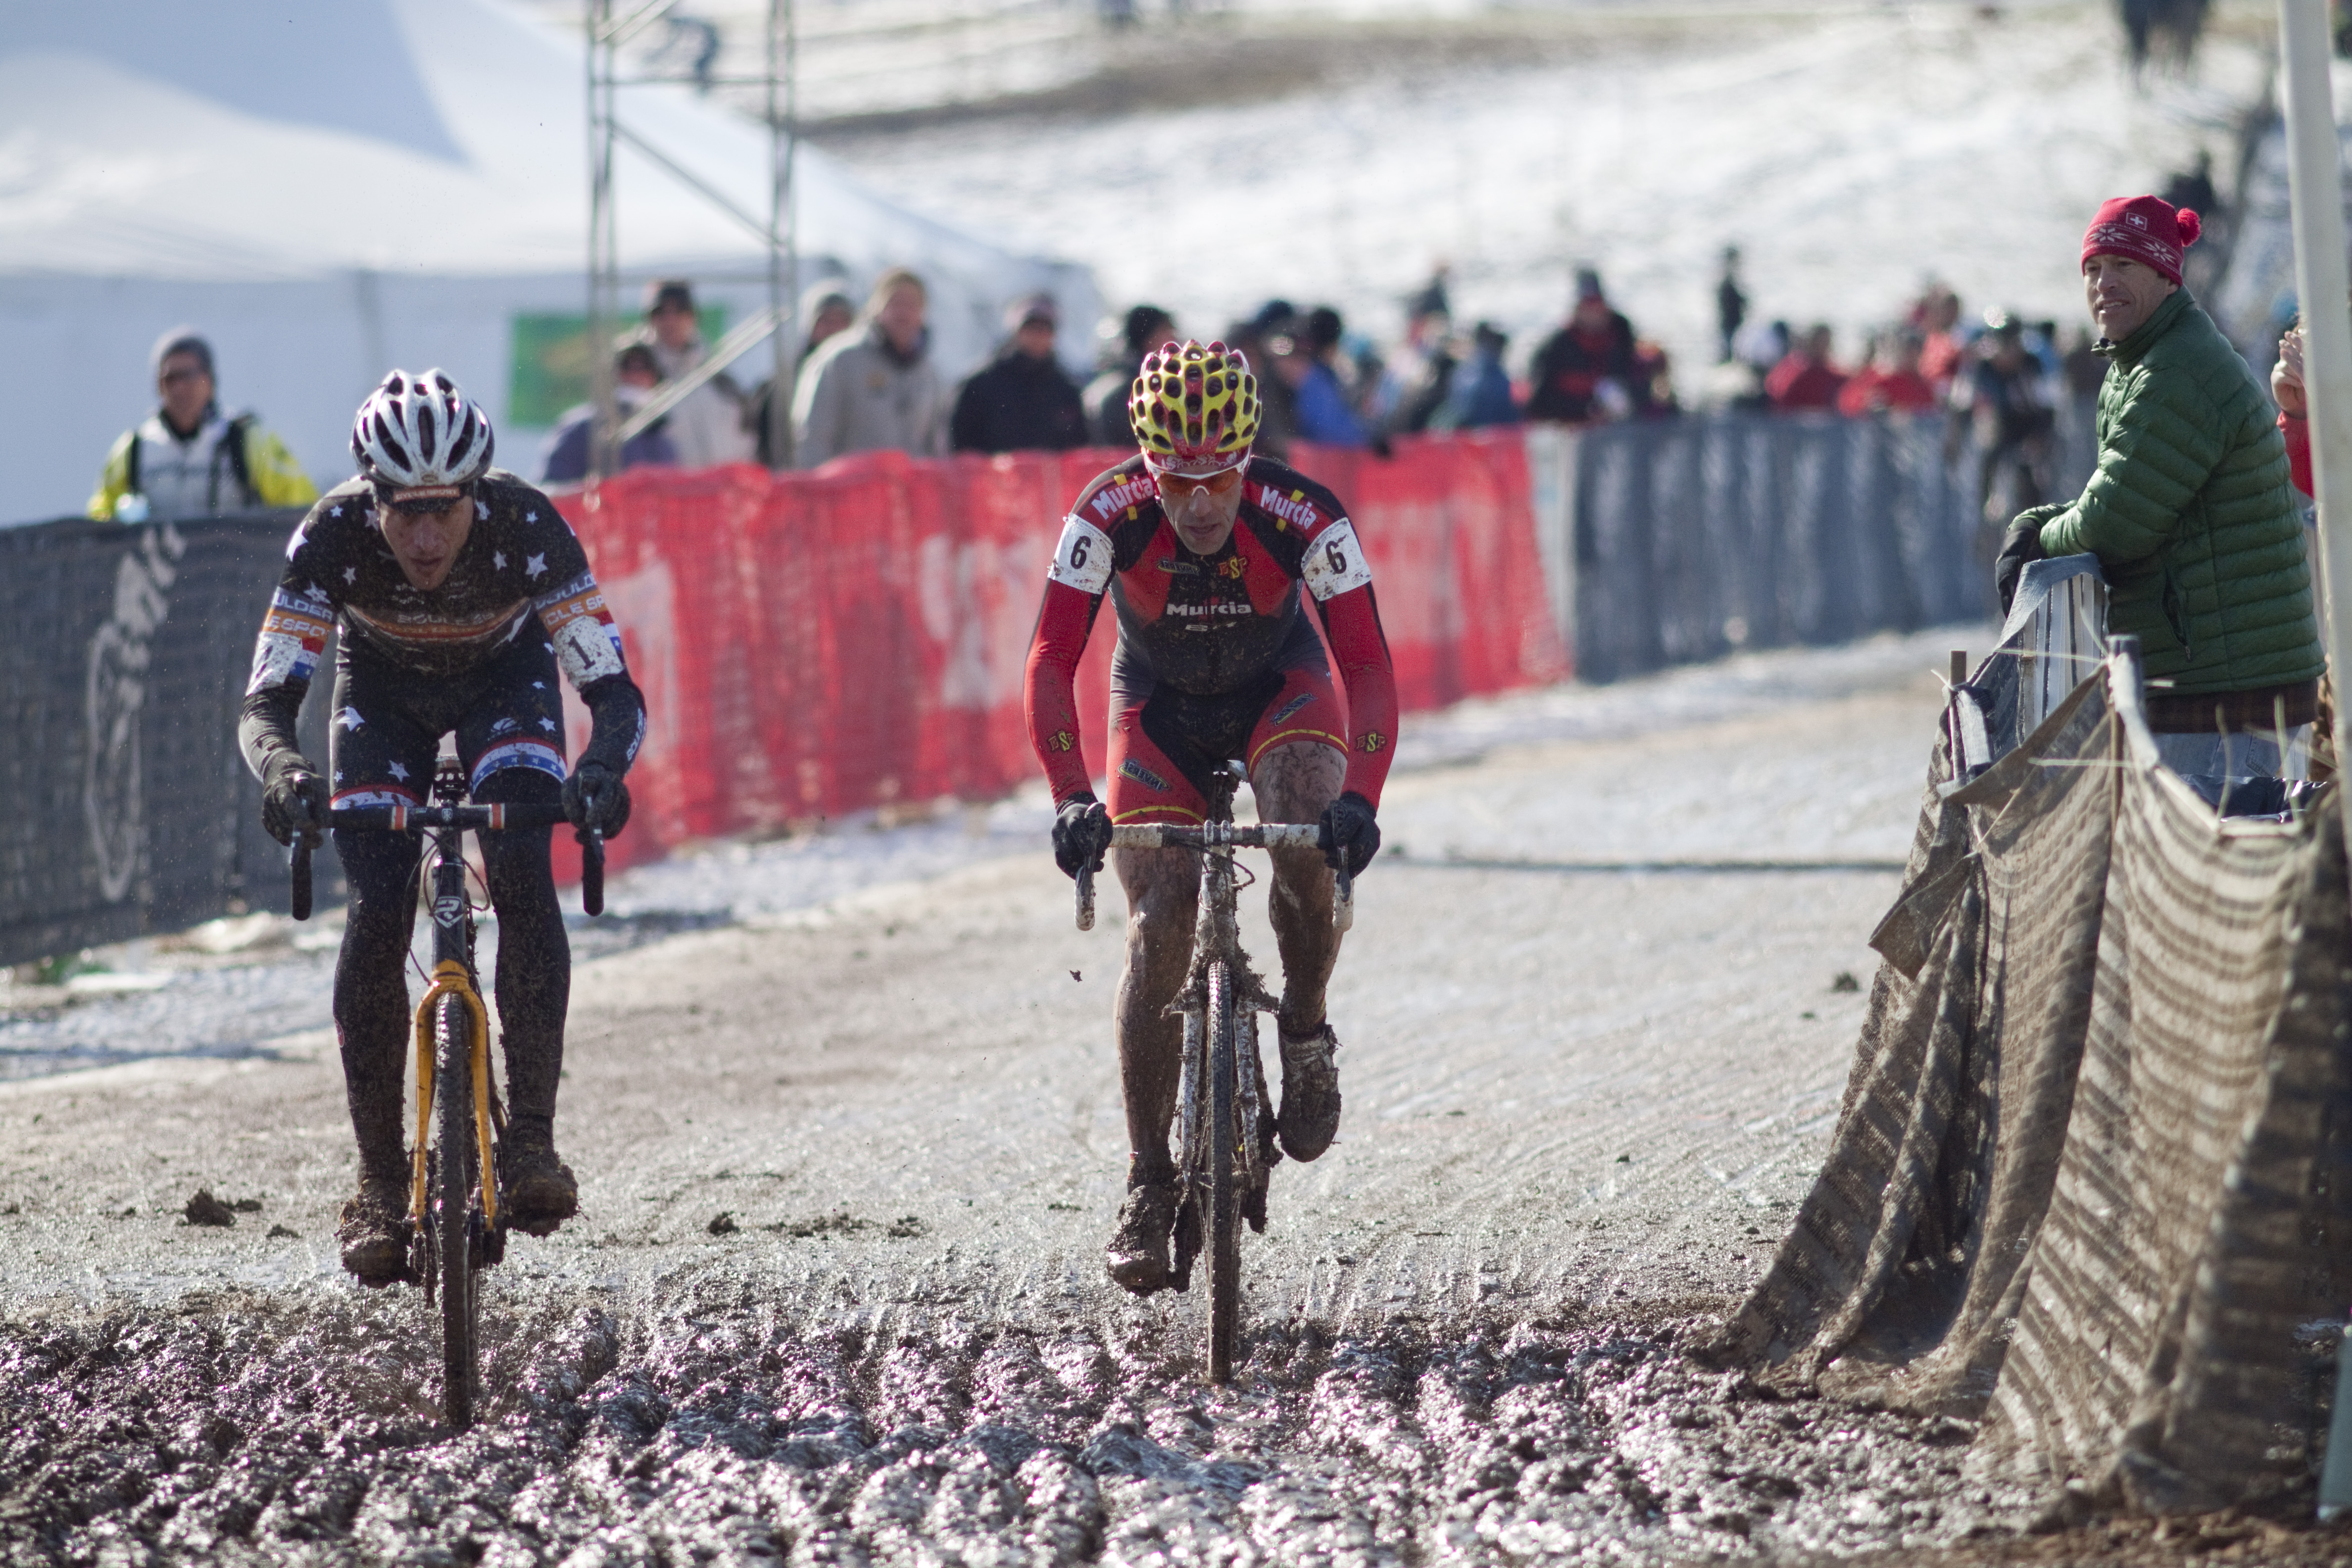 Pete Webber and the Spanish contender battle at 2013 Cyclocross World Championship Masters Men 40-44. © Cyclocross Magazine